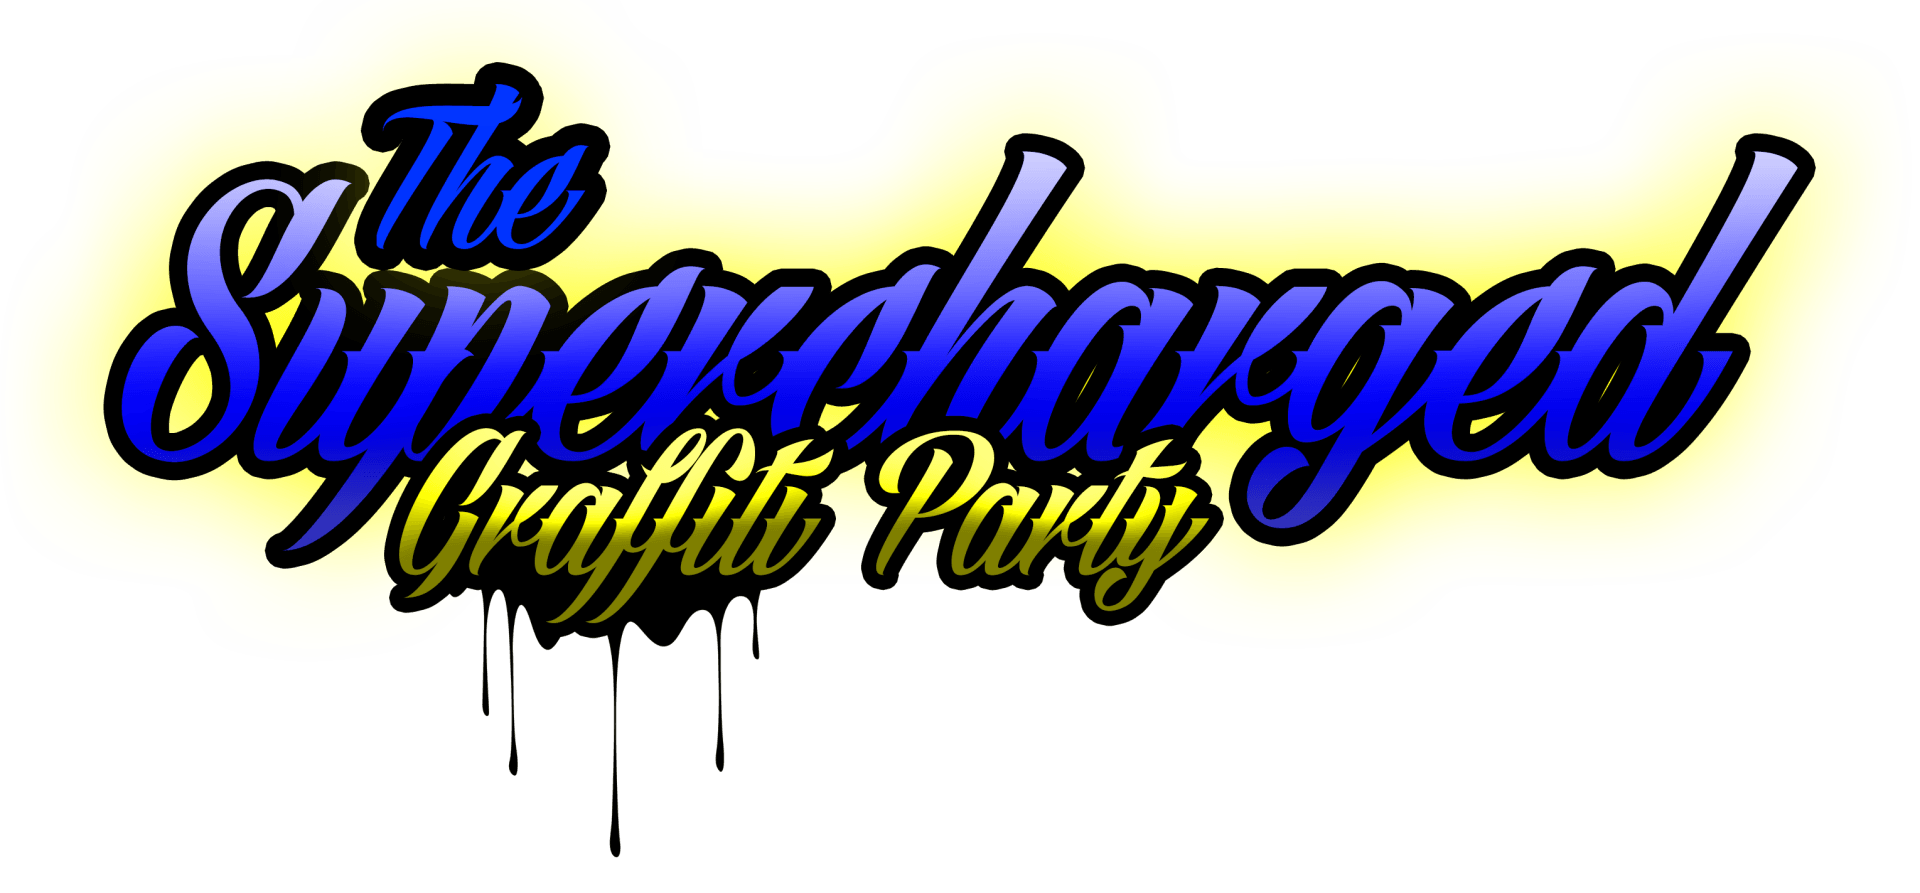 The Supercharged Graffiti Party